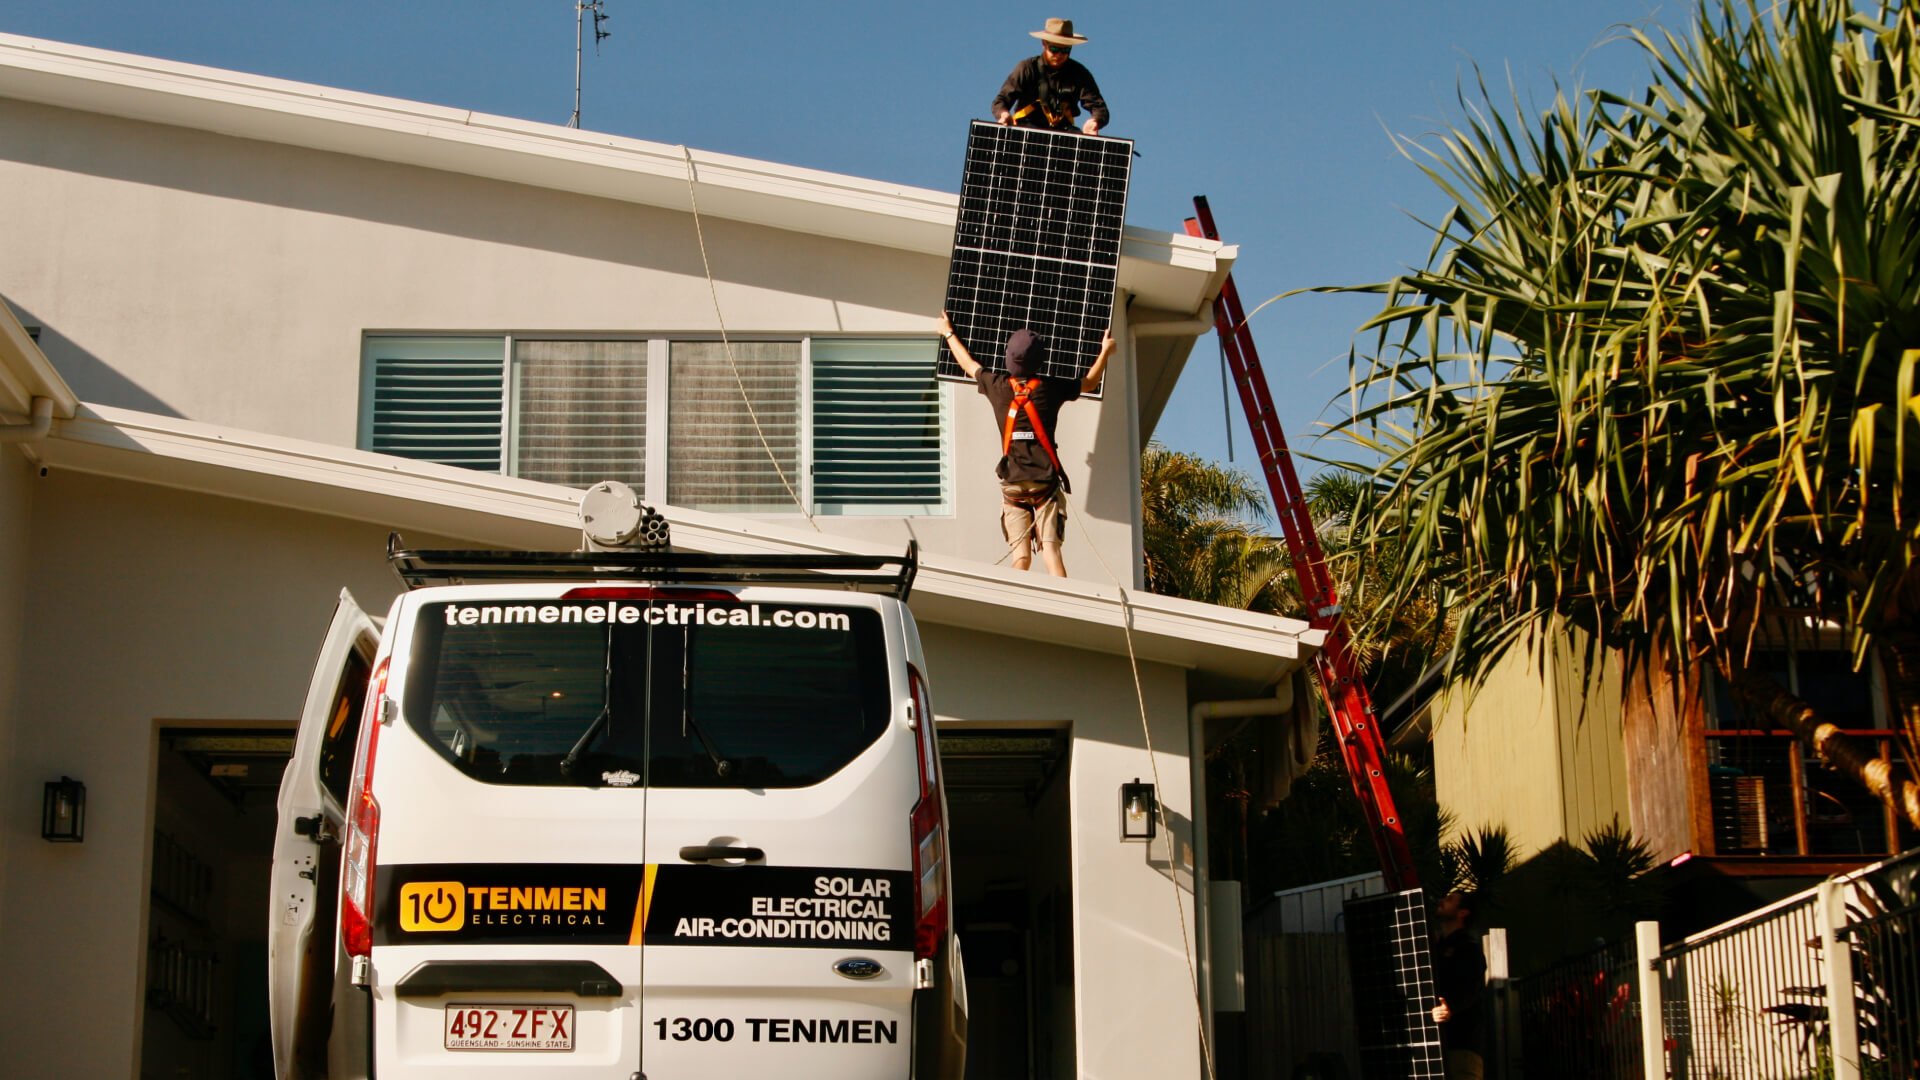 Two workers transporting a solar panel to the roof of a house on the Sunshine Coast.